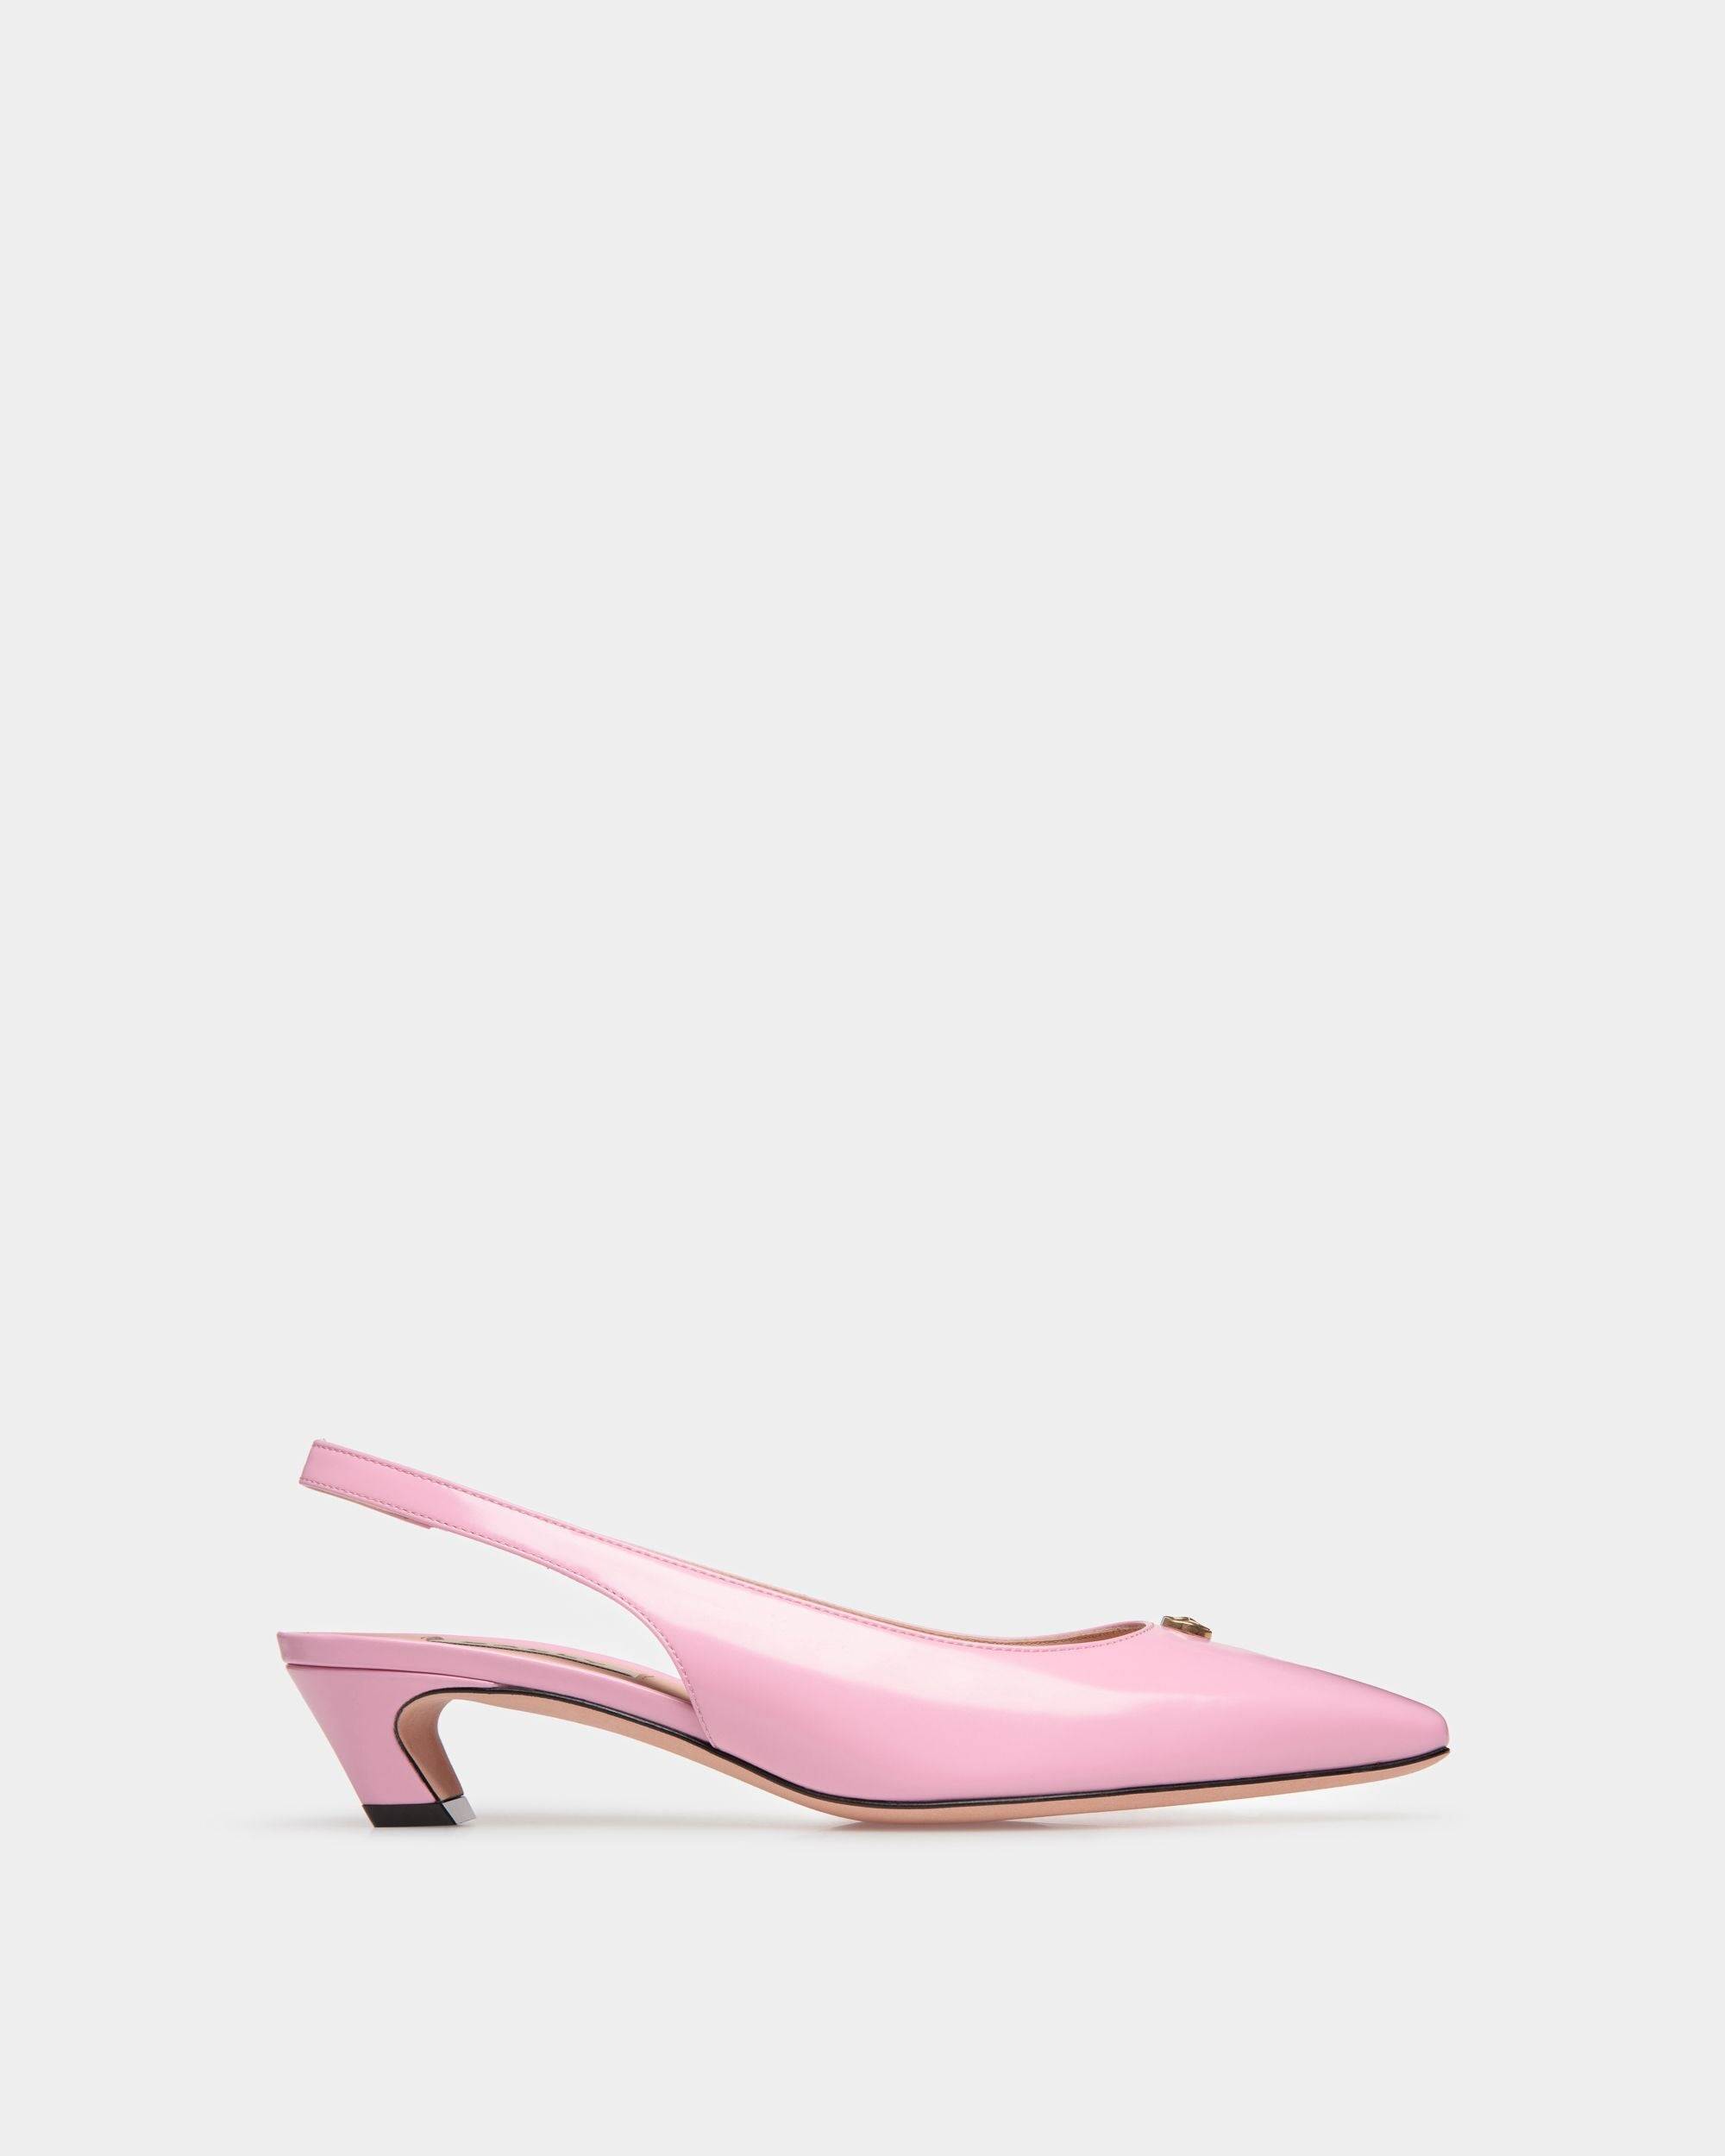 Sylt | Women's Slingback Pump in Pink Leather | Bally | Still Life Side